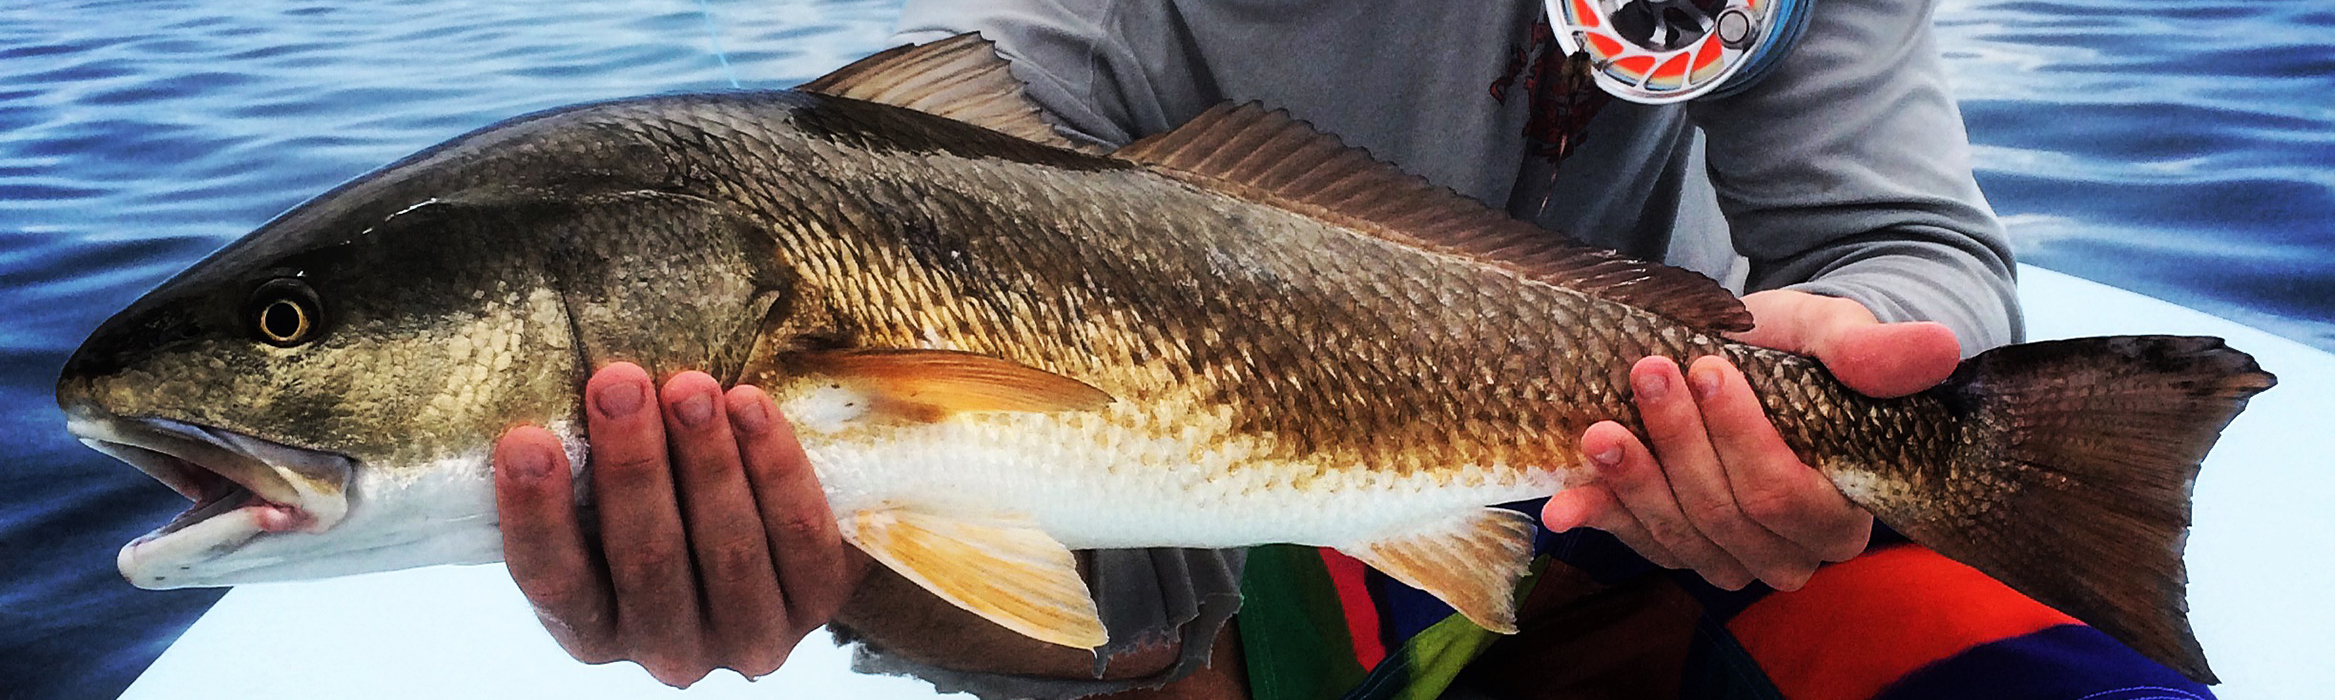 miami-fishing-guide-with-redfish